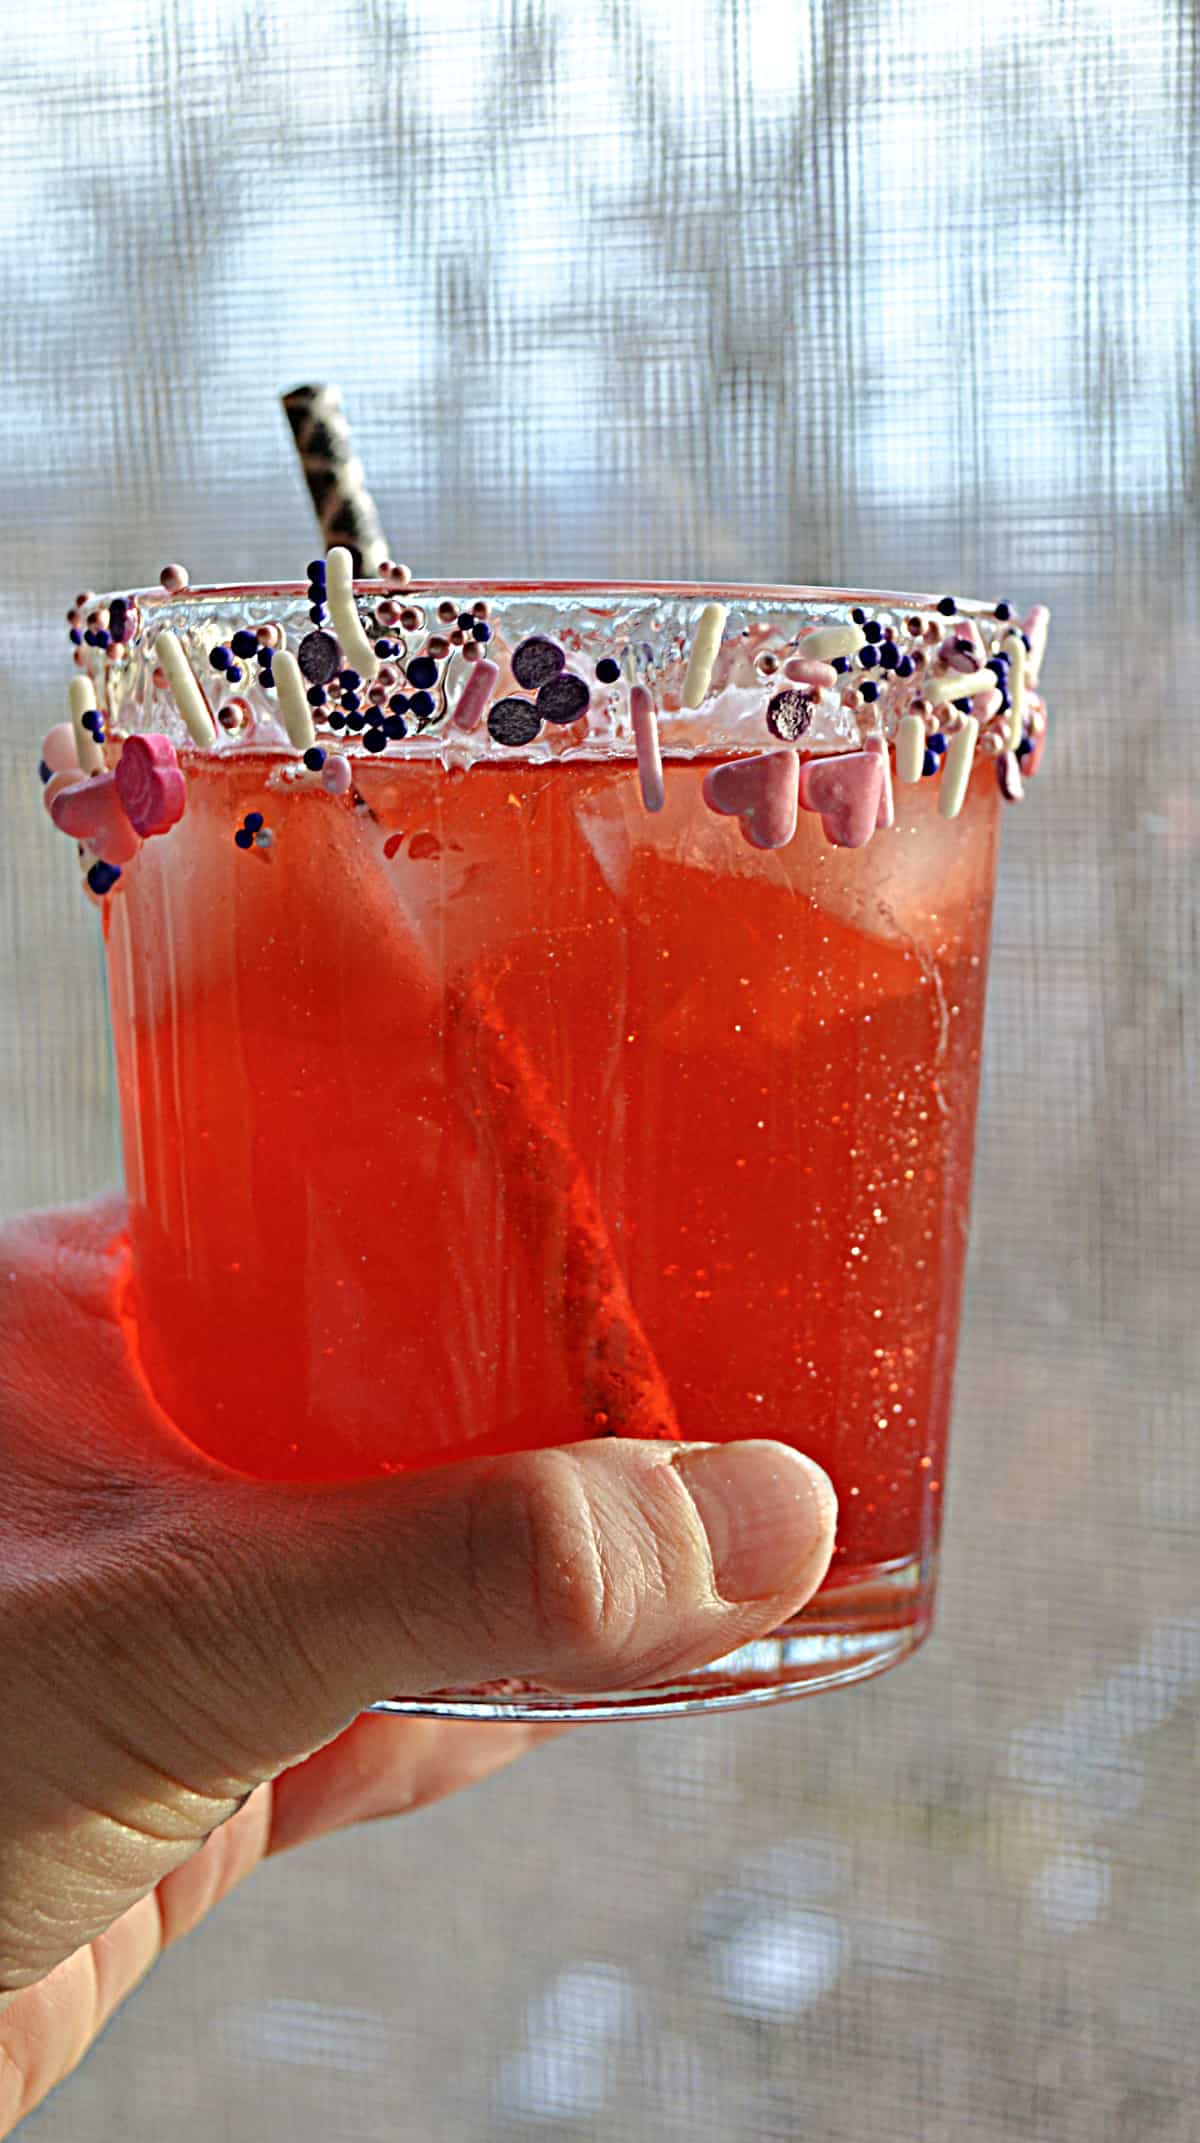 A close up view of a hand holding a berry mocktail with a straw in the glass.